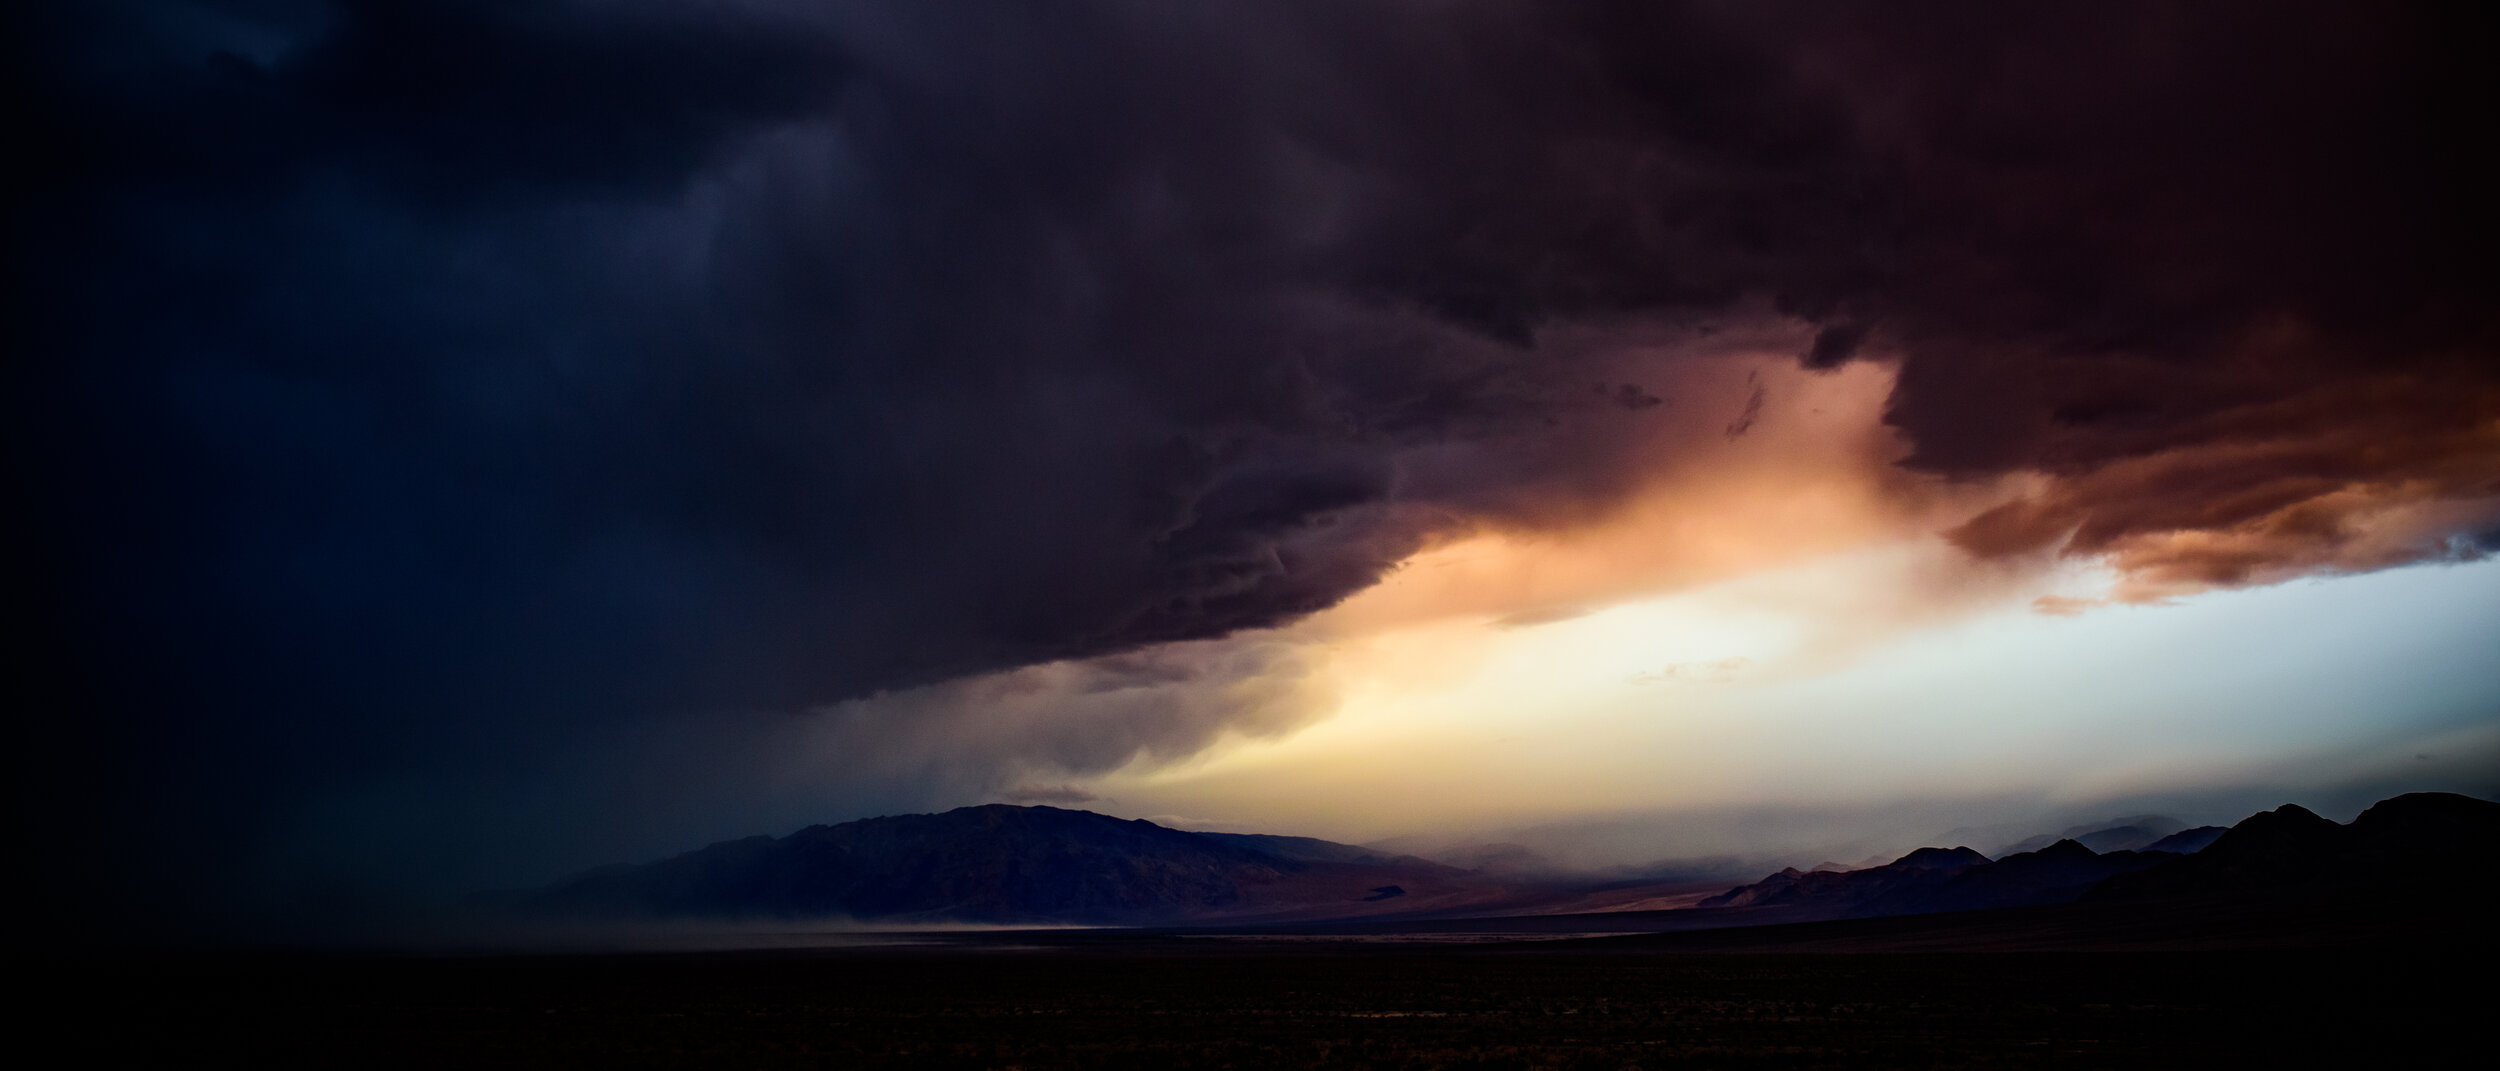 A storm enters Death Valley